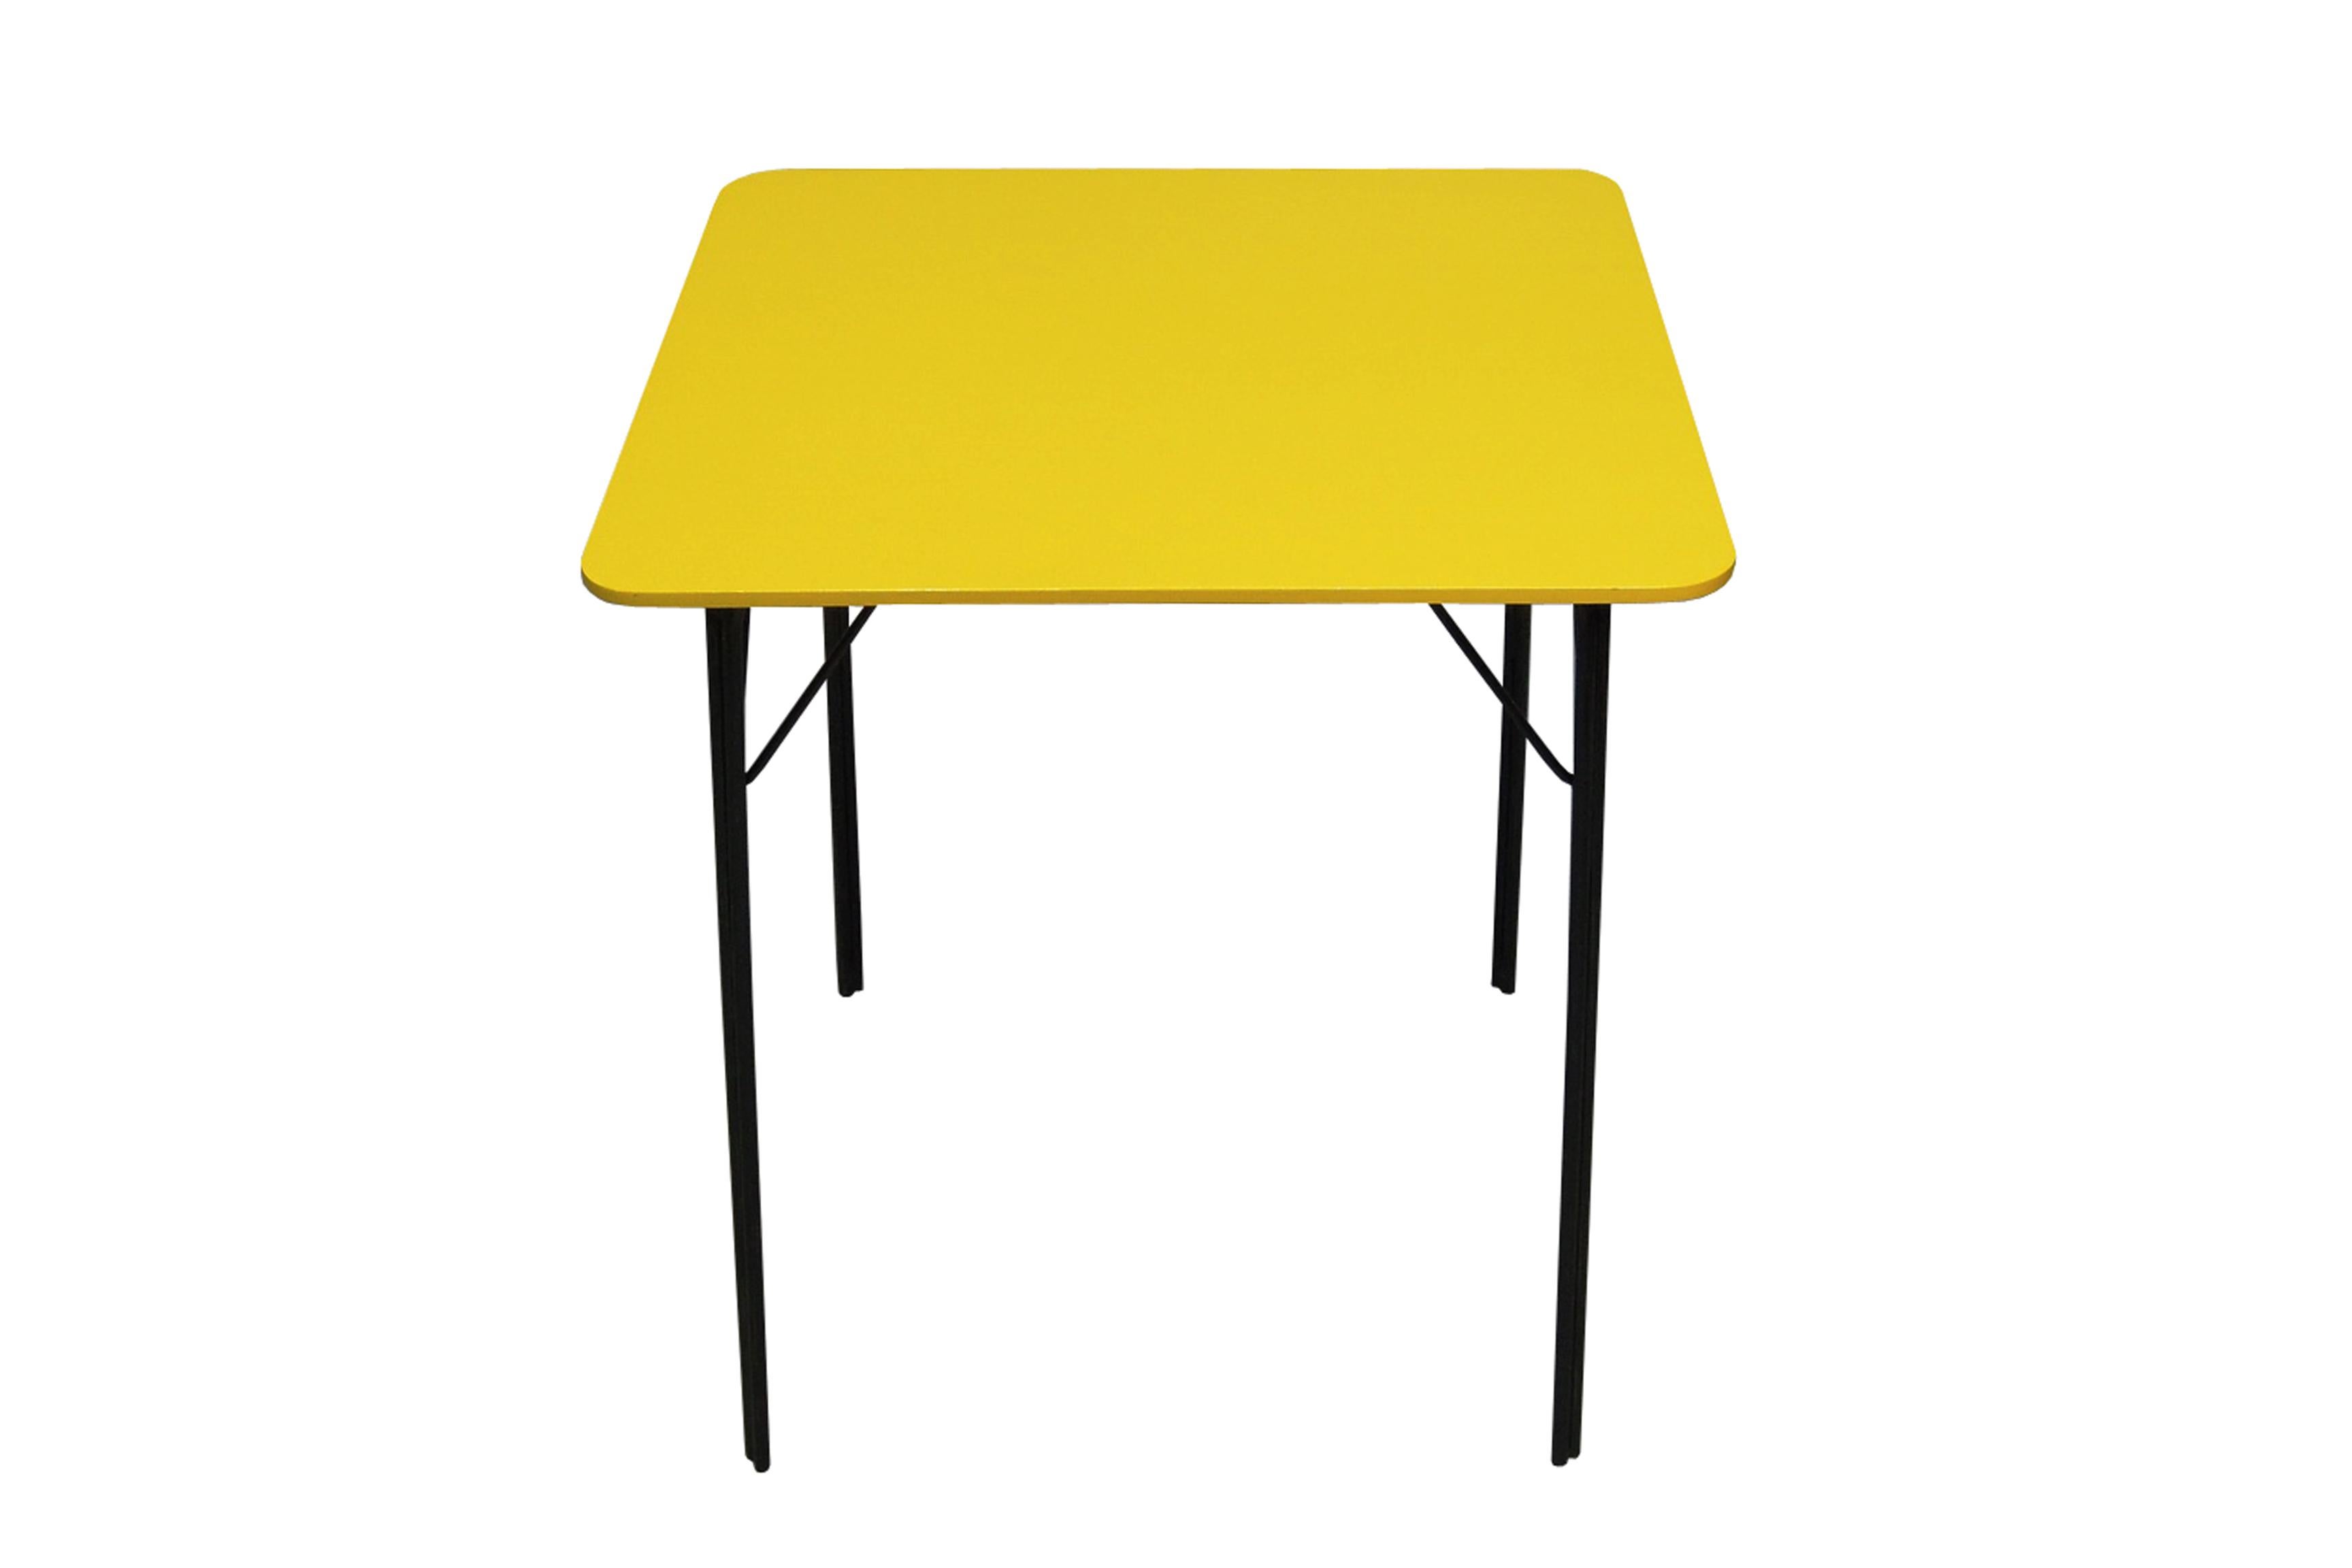 The original color combination of yellow and black makes for a visually striking piece. The slim tabletop with rounded corners and the slender black metal legs formed from two circular tubes joined together create an unusual overall aesthetic. The